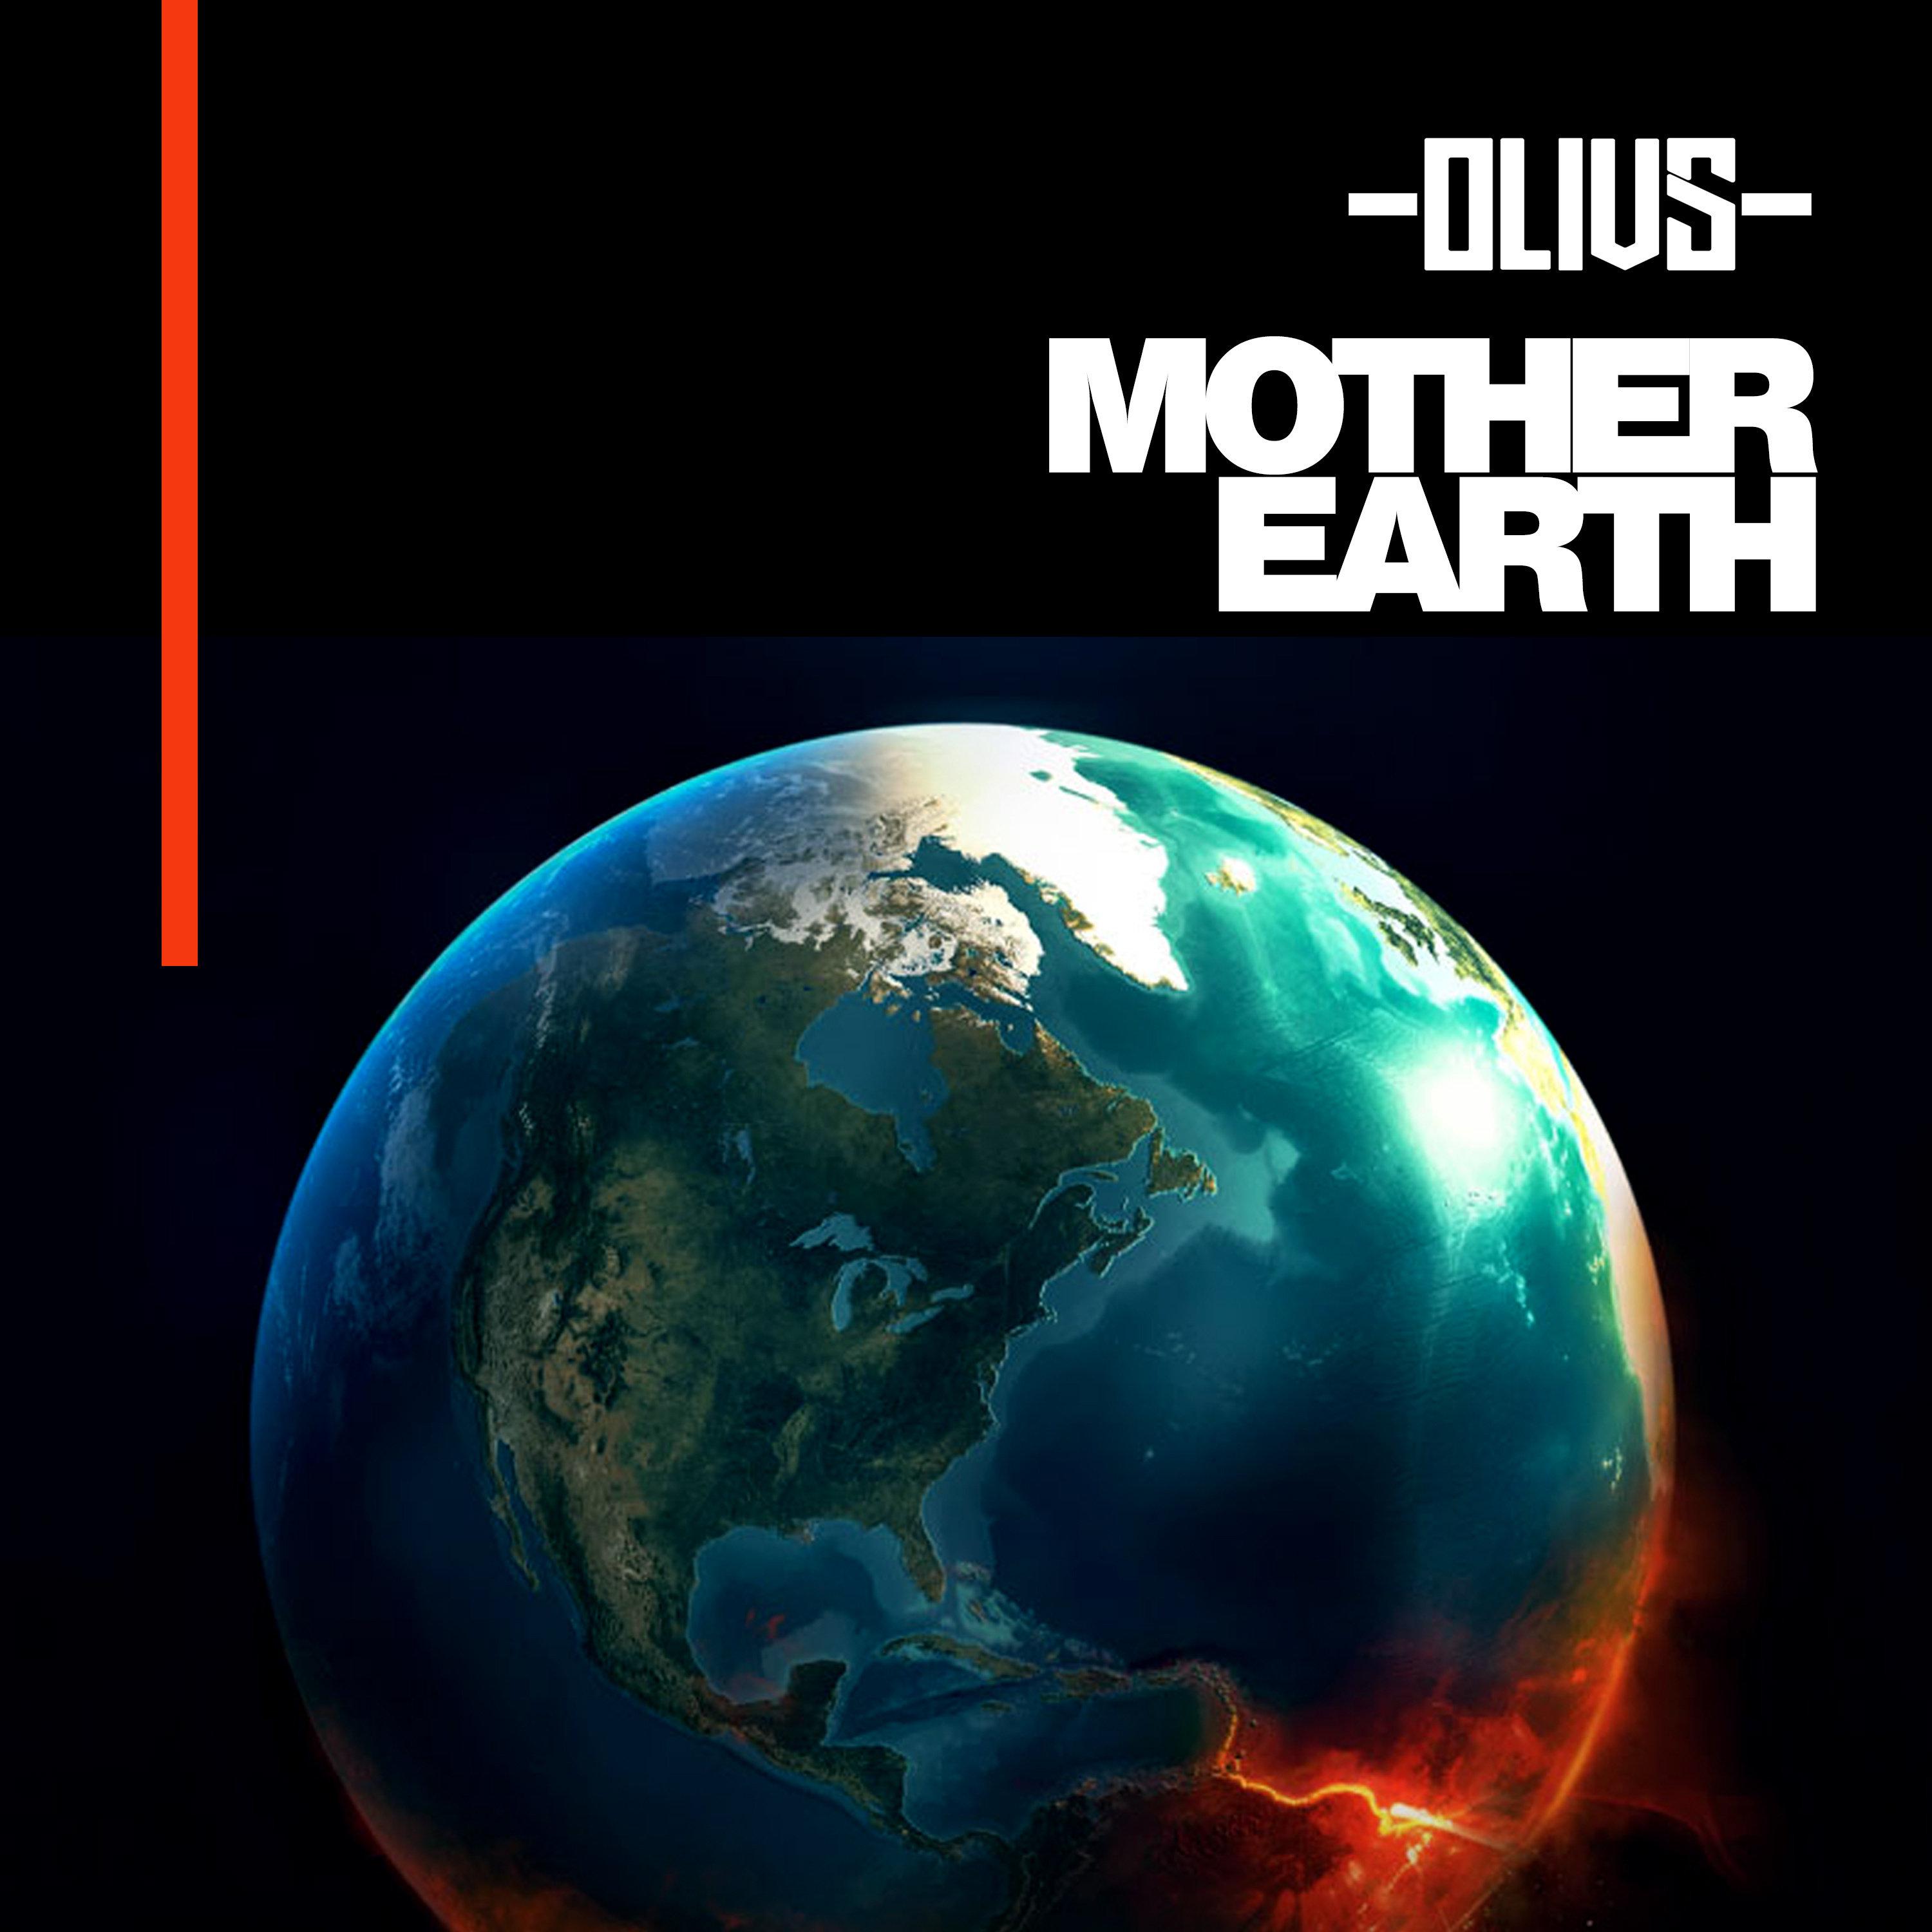 Olivs - Mother Earth